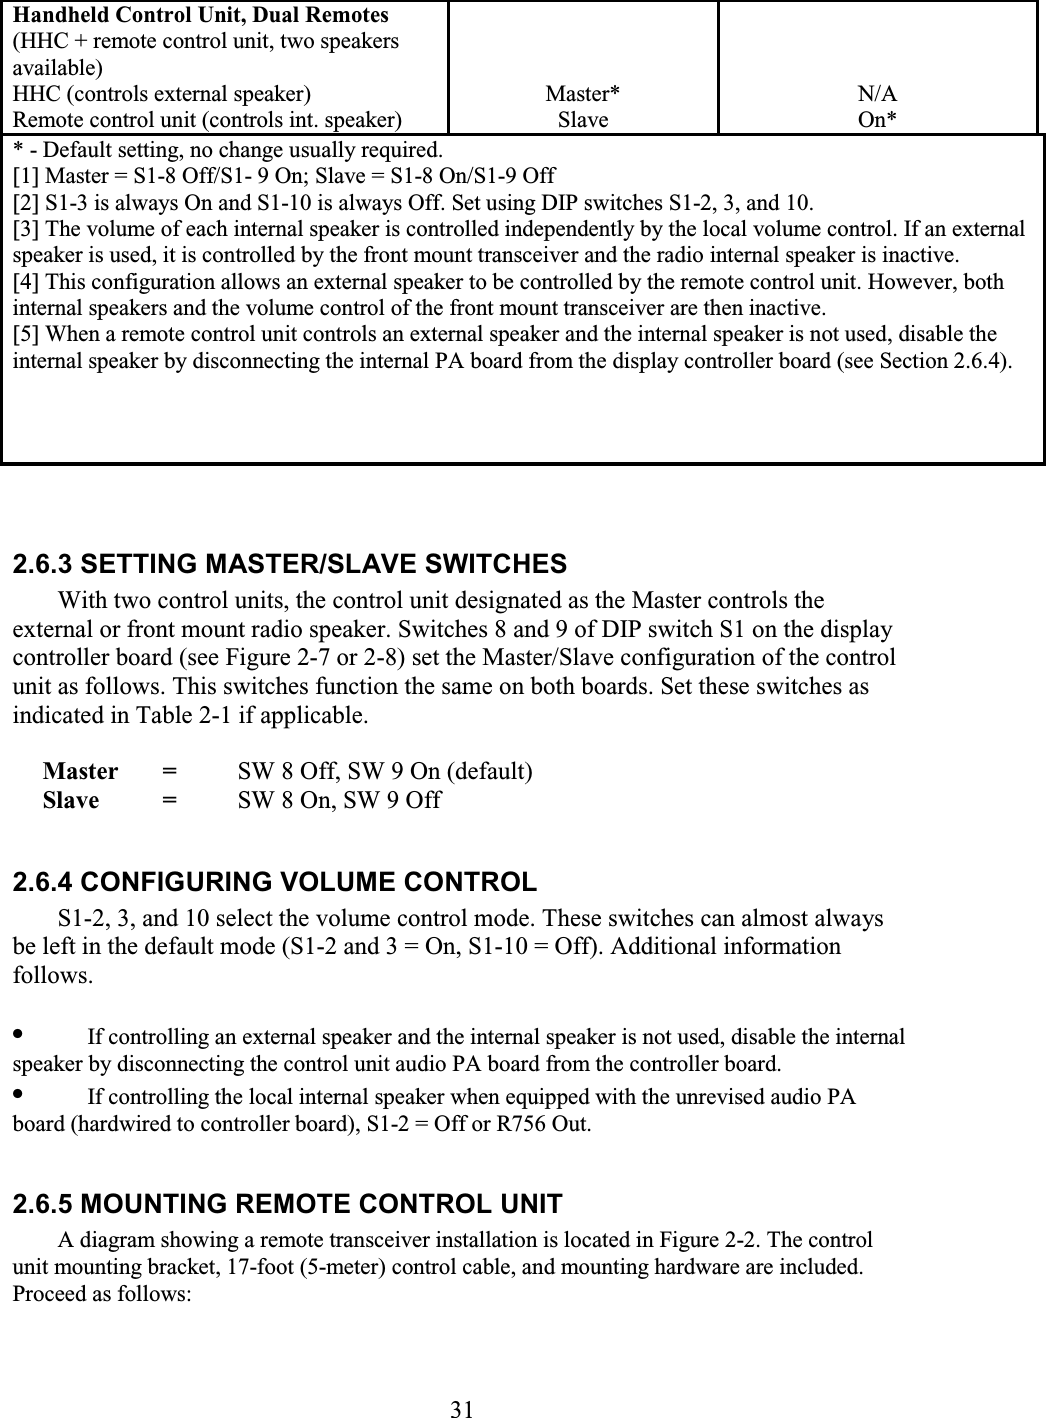 31 Handheld Control Unit, Dual Remotes (HHC + remote control unit, two speakers available)  HHC (controls external speaker)  Remote control unit (controls int. speaker)     Master*  Slave    N/A On* * - Default setting, no change usually required.  [1] Master = S1-8 Off/S1- 9 On; Slave = S1-8 On/S1-9 Off  [2] S1-3 is always On and S1-10 is always Off. Set using DIP switches S1-2, 3, and 10.  [3] The volume of each internal speaker is controlled independently by the local volume control. If an external speaker is used, it is controlled by the front mount transceiver and the radio internal speaker is inactive.  [4] This configuration allows an external speaker to be controlled by the remote control unit. However, both internal speakers and the volume control of the front mount transceiver are then inactive.  [5] When a remote control unit controls an external speaker and the internal speaker is not used, disable the internal speaker by disconnecting the internal PA board from the display controller board (see Section 2.6.4).    2.6.3 SETTING MASTER/SLAVE SWITCHES  With two control units, the control unit designated as the Master controls the external or front mount radio speaker. Switches 8 and 9 of DIP switch S1 on the display controller board (see Figure 2-7 or 2-8) set the Master/Slave configuration of the control unit as follows. This switches function the same on both boards. Set these switches as indicated in Table 2-1 if applicable.  Master =   SW 8 Off, SW 9 On (default)  Slave =   SW 8 On, SW 9 Off  2.6.4 CONFIGURING VOLUME CONTROL  S1-2, 3, and 10 select the volume control mode. These switches can almost always be left in the default mode (S1-2 and 3 = On, S1-10 = Off). Additional information follows.  •  If controlling an external speaker and the internal speaker is not used, disable the internal speaker by disconnecting the control unit audio PA board from the controller board.  •  If controlling the local internal speaker when equipped with the unrevised audio PA board (hardwired to controller board), S1-2 = Off or R756 Out.   2.6.5 MOUNTING REMOTE CONTROL UNIT  A diagram showing a remote transceiver installation is located in Figure 2-2. The control unit mounting bracket, 17-foot (5-meter) control cable, and mounting hardware are included. Proceed as follows:  